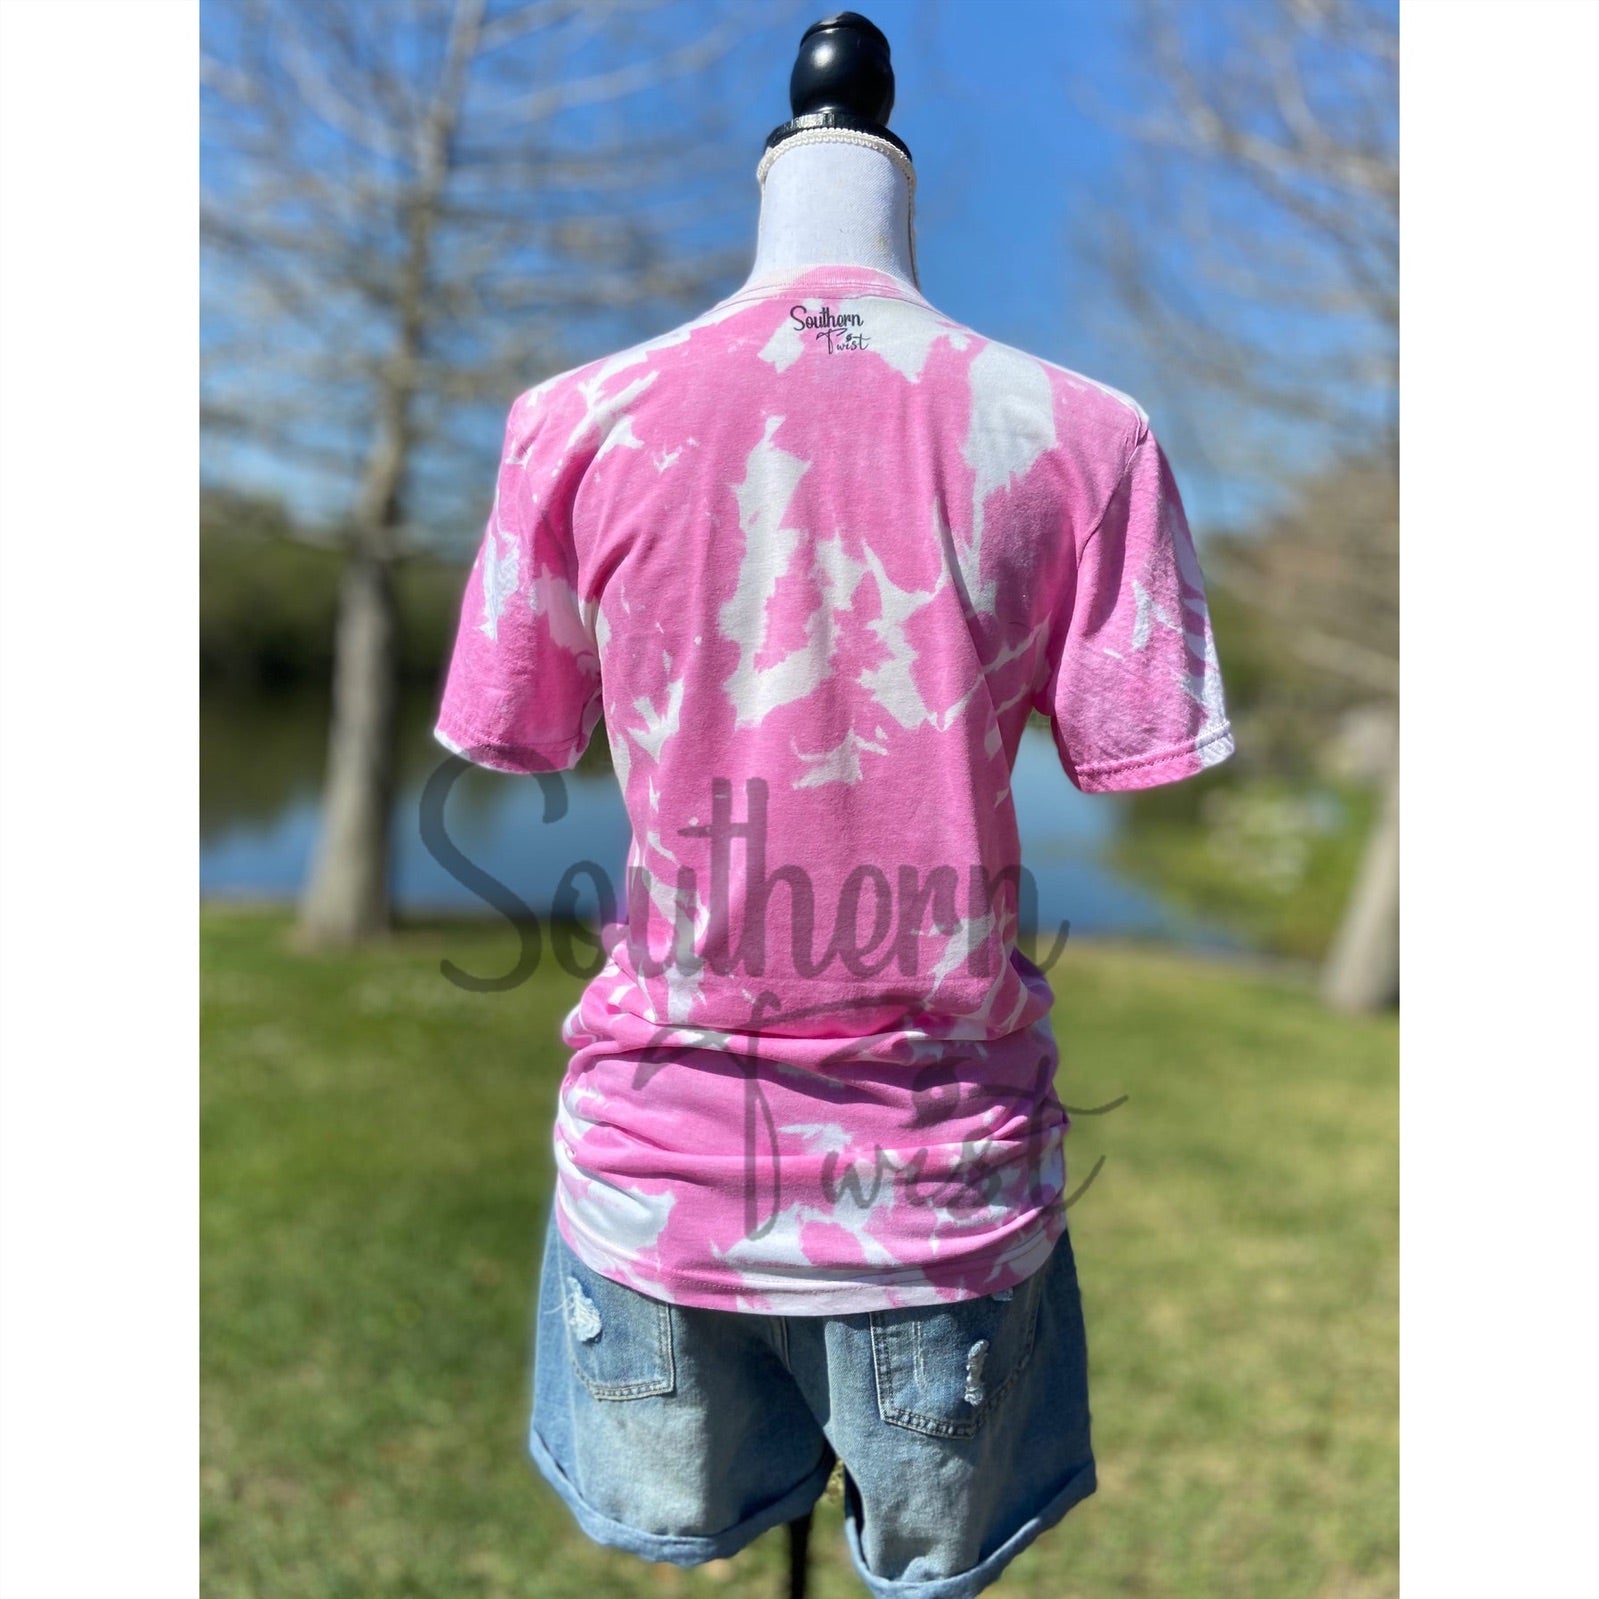 “Peter Cottontail” Polka Dot Easter Bleached Sublimation Boyfriend Basic Tee Shirt Pink S/M/L/XL/2X